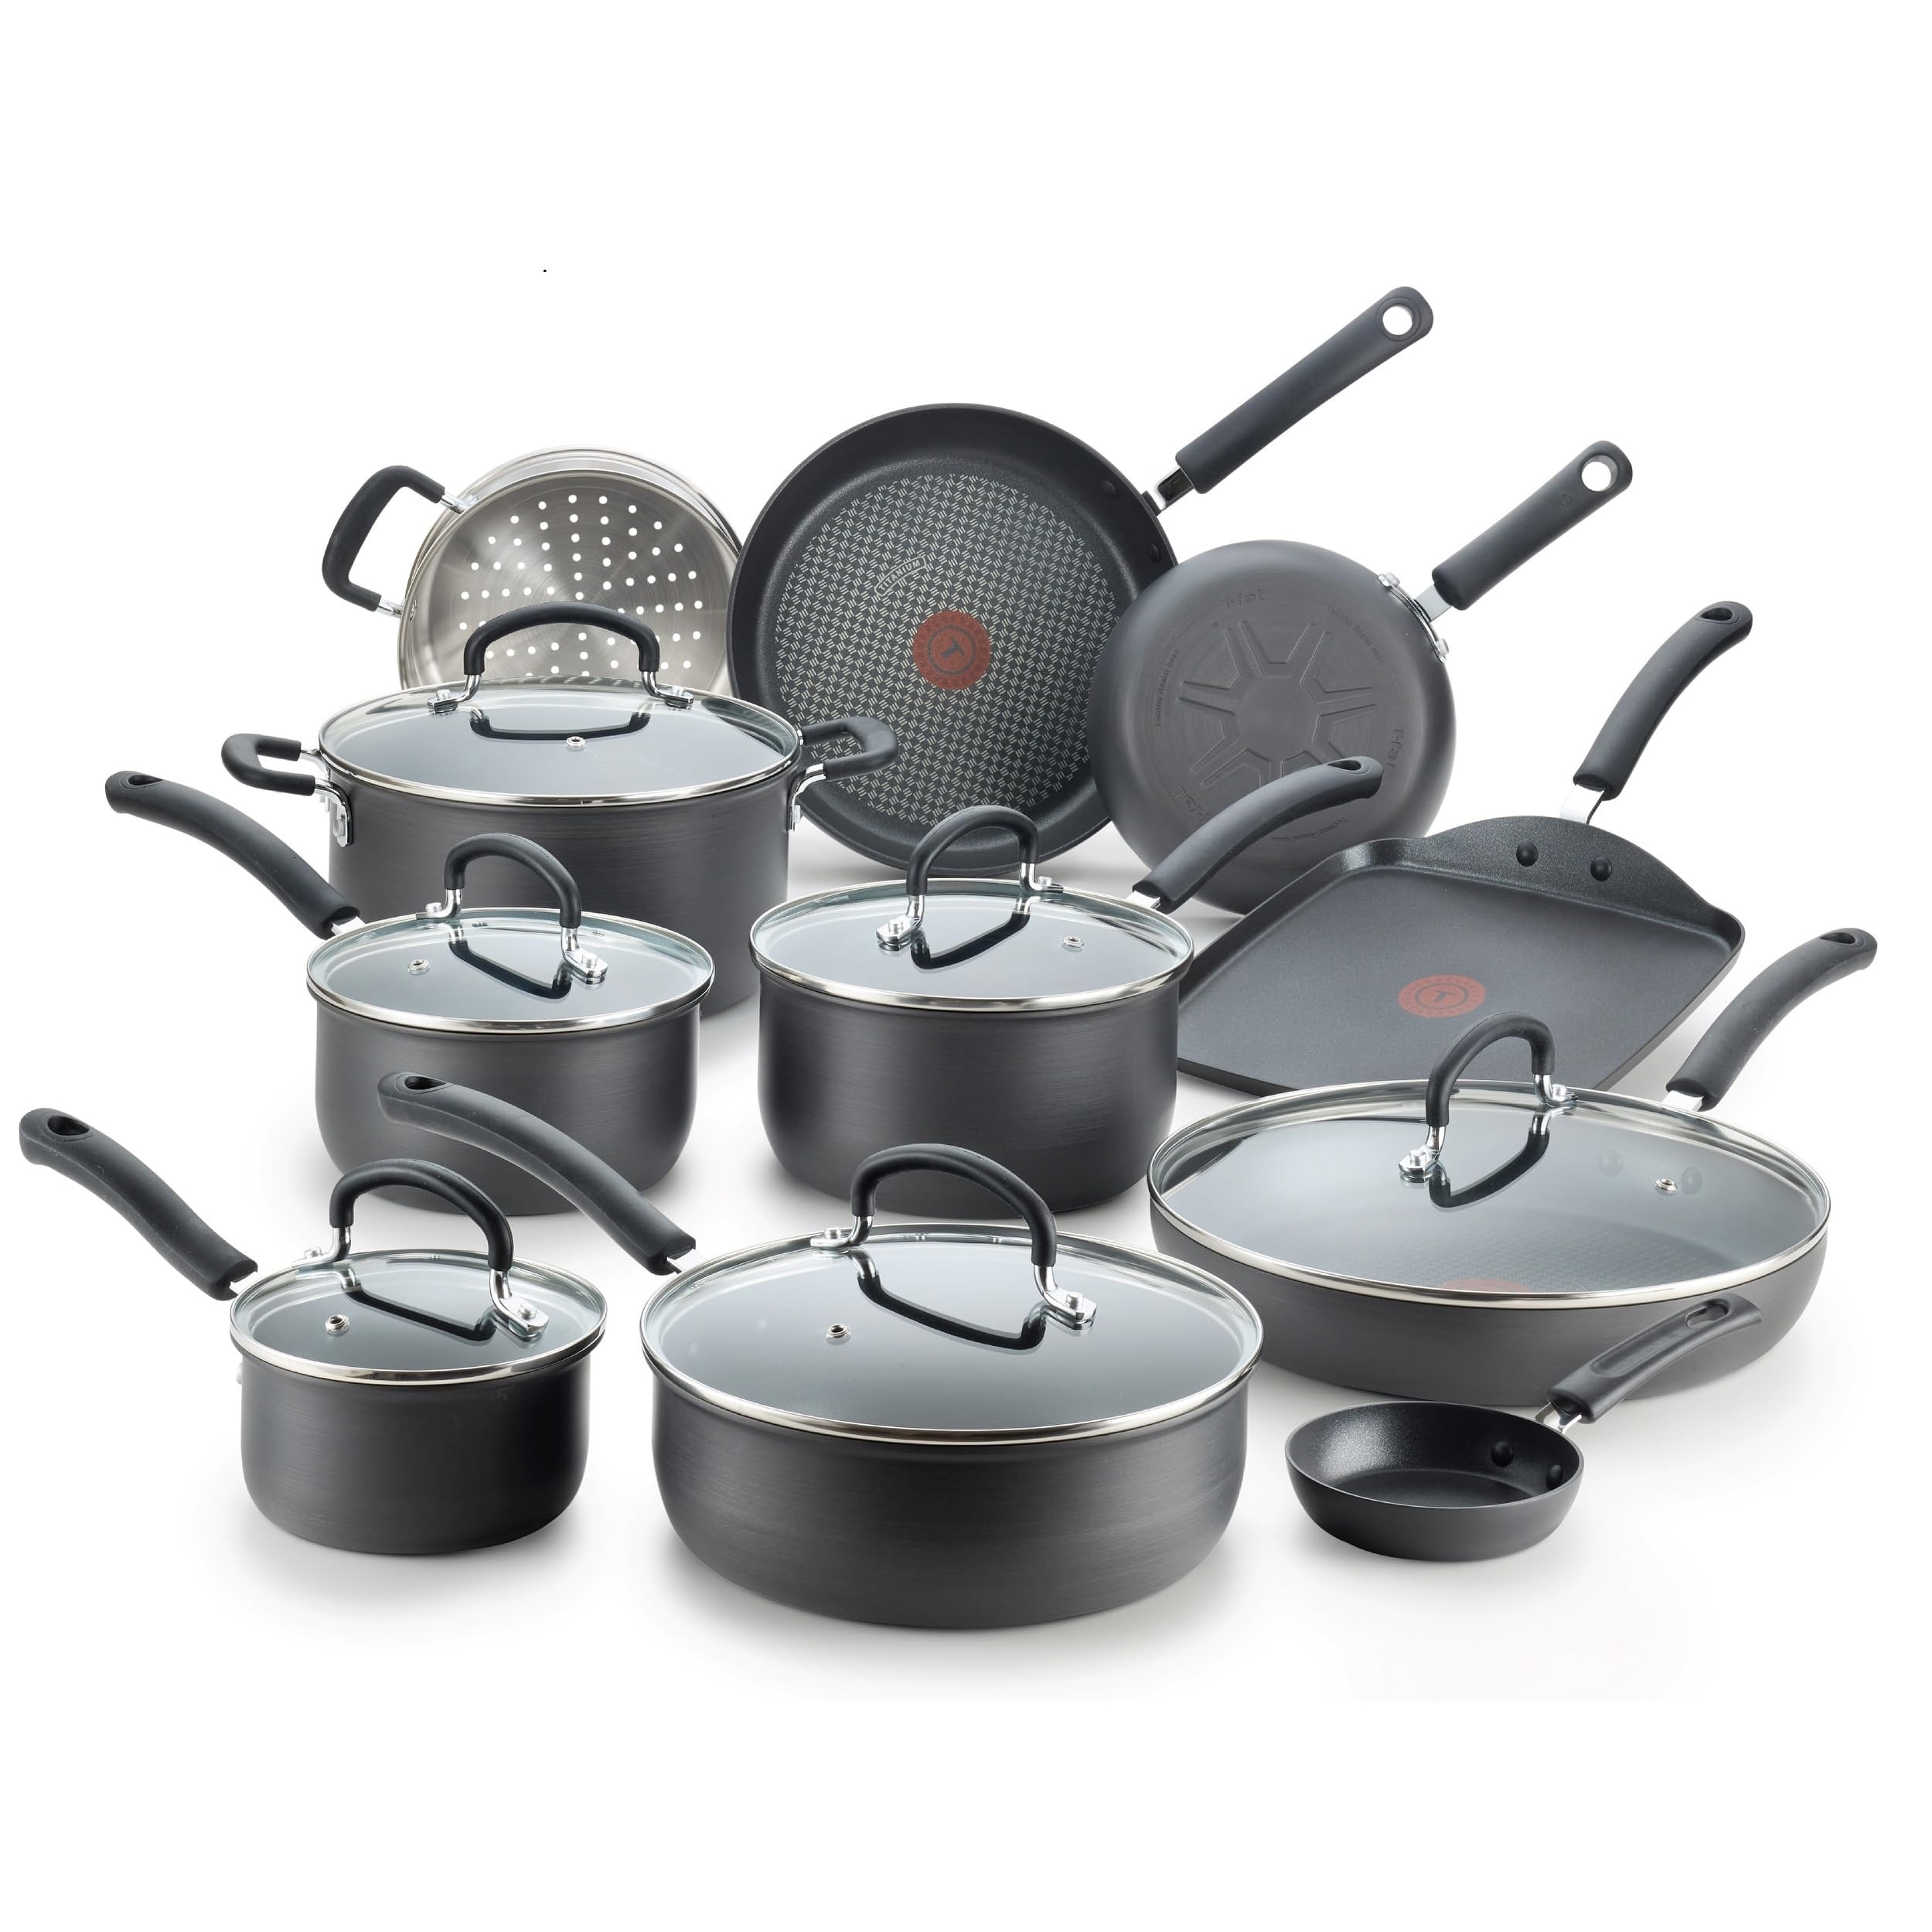 https://ak1.ostkcdn.com/images/products/is/images/direct/ebf1273e820dc0f9e894ad1066359f7236e85fce/Ultimate-Hard-Anodized-Nonstick-Cookware-Set-17-Piece-Pots-and-Pans%2C-Dishwasher-Safe-Black.jpg